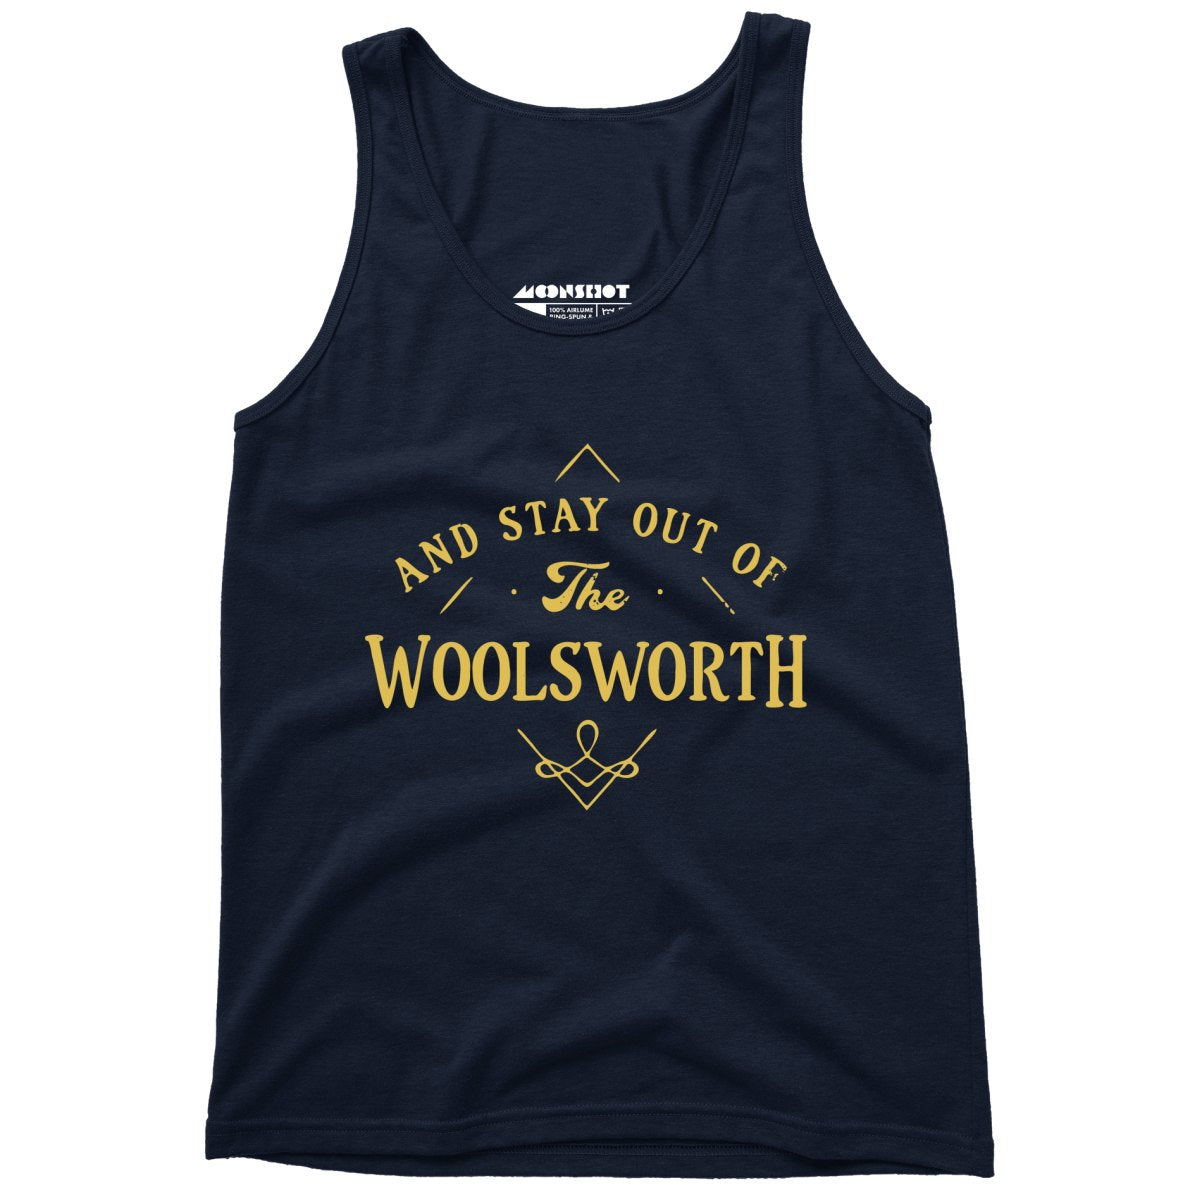 And Stay Out of The Woolsworth - Unisex Tank Top